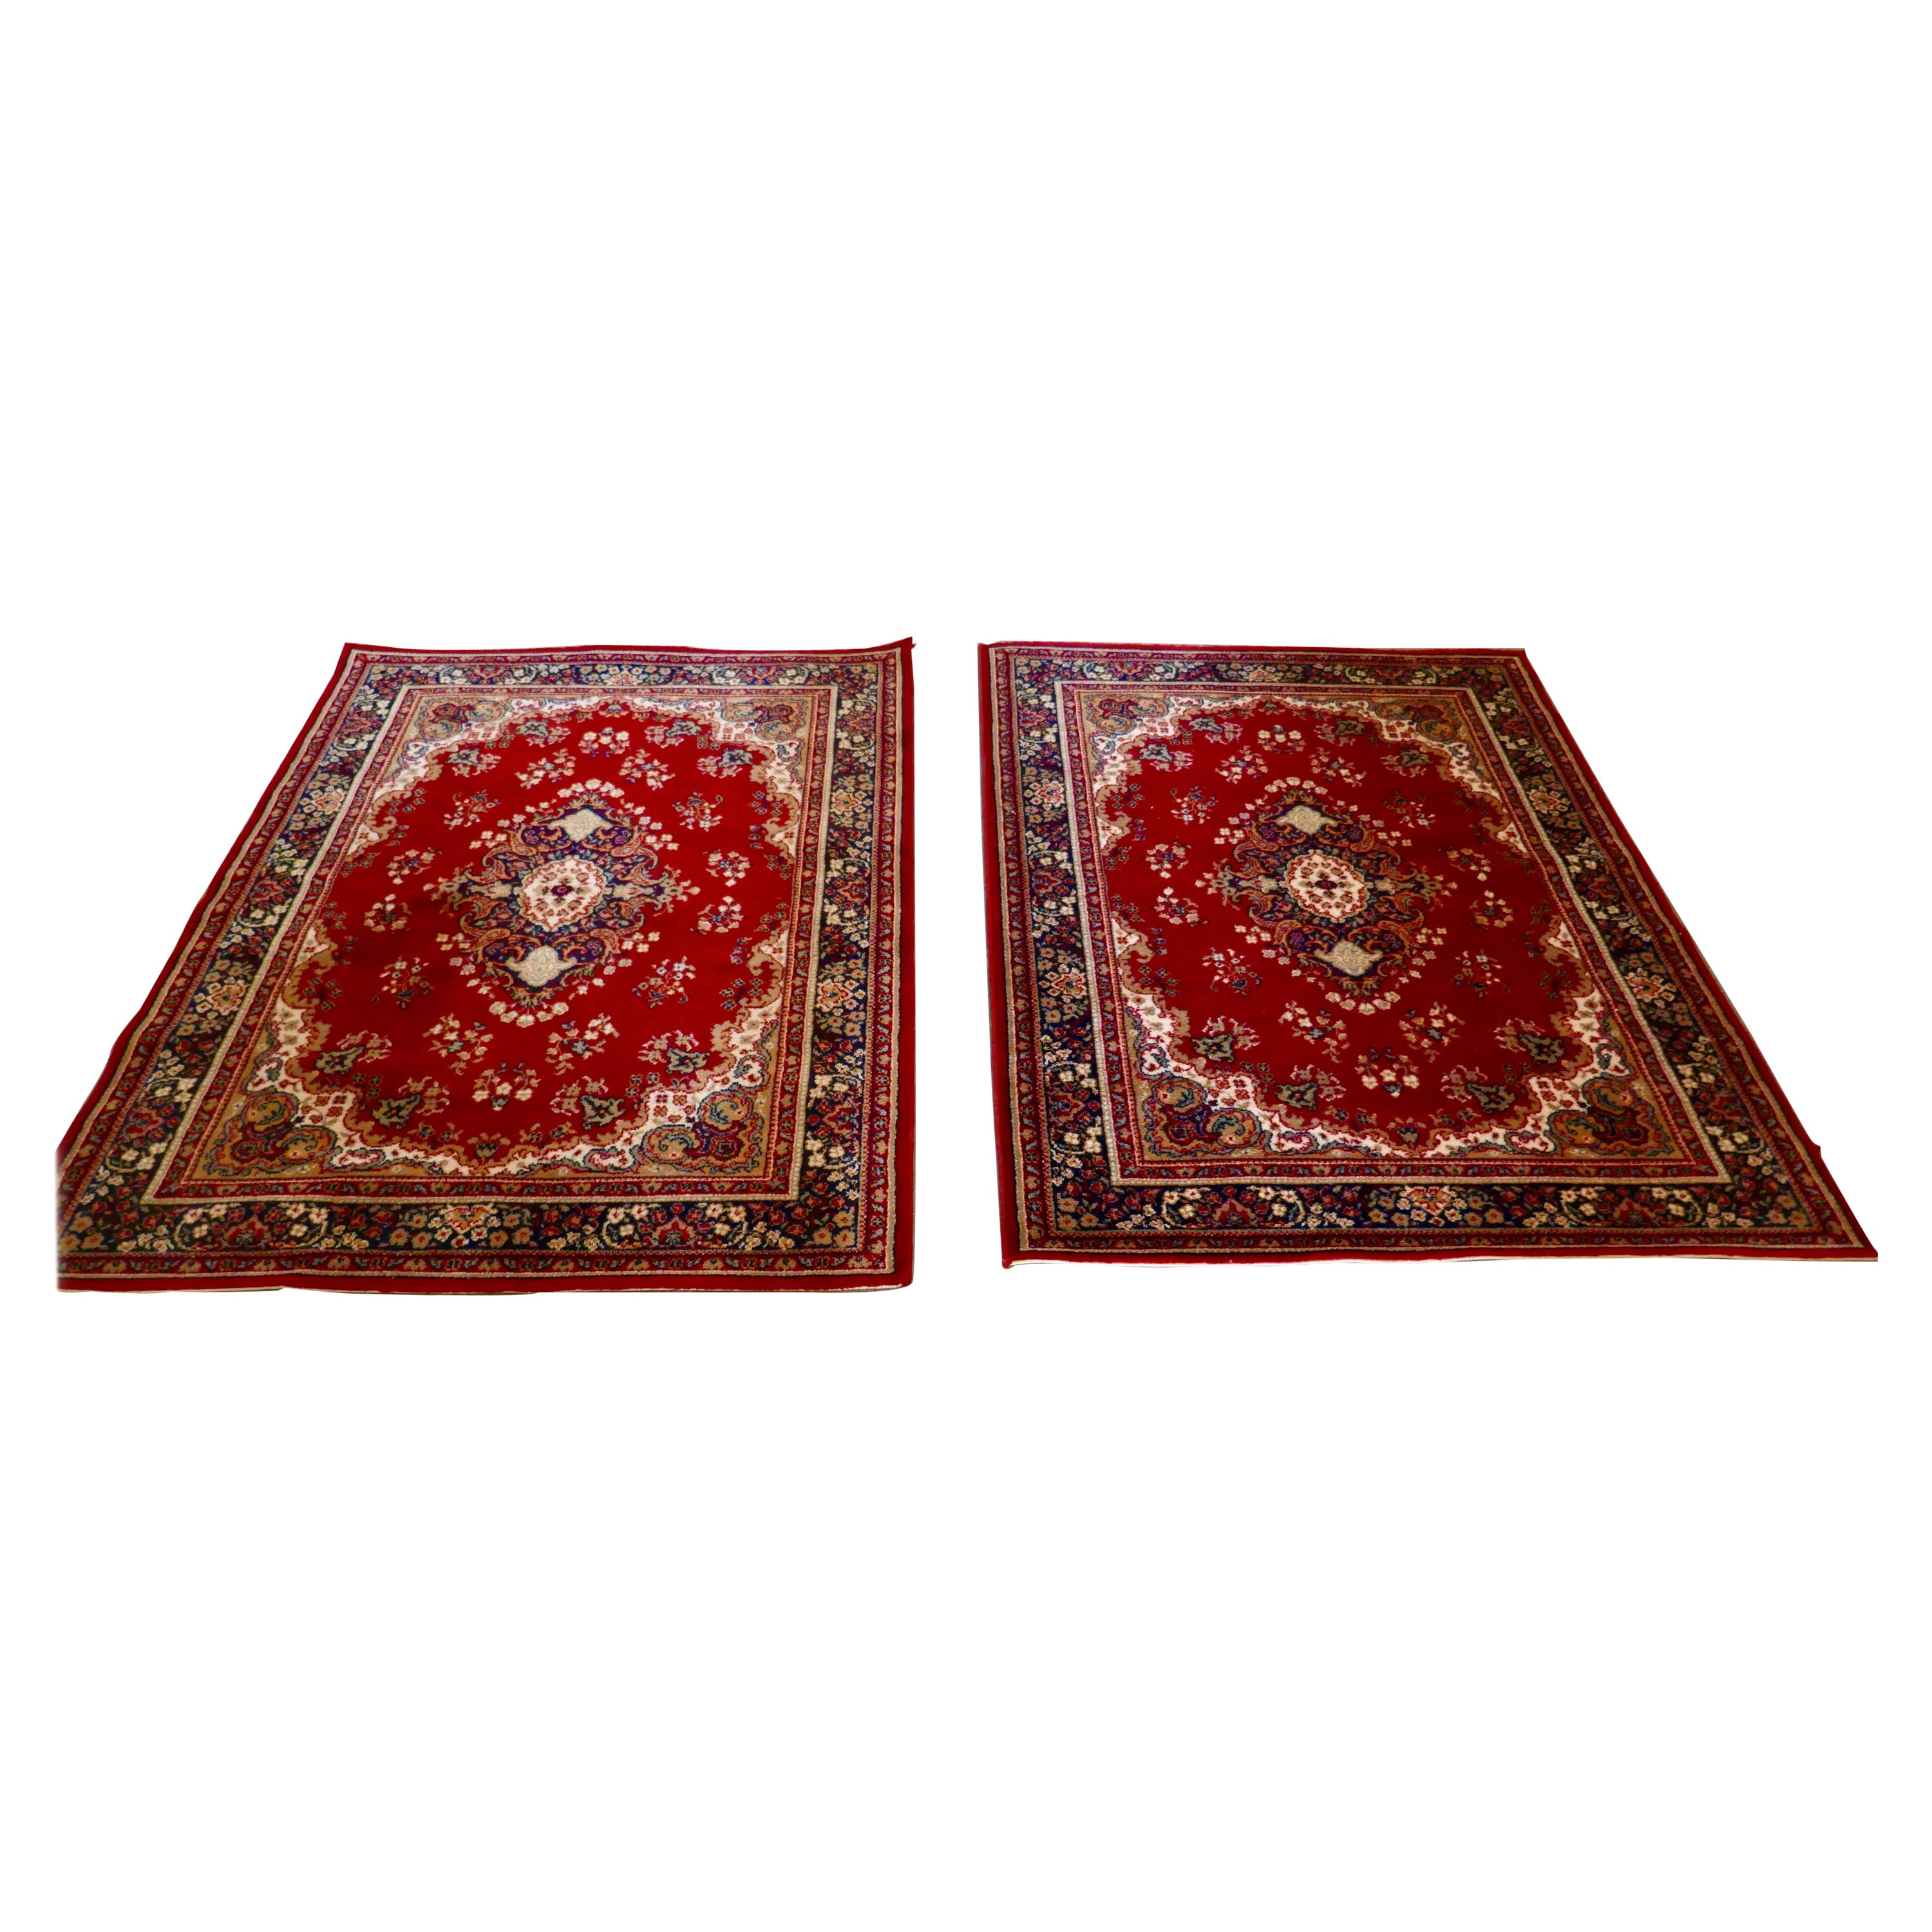 Lovely Pair of Bright Red Wool Rugs